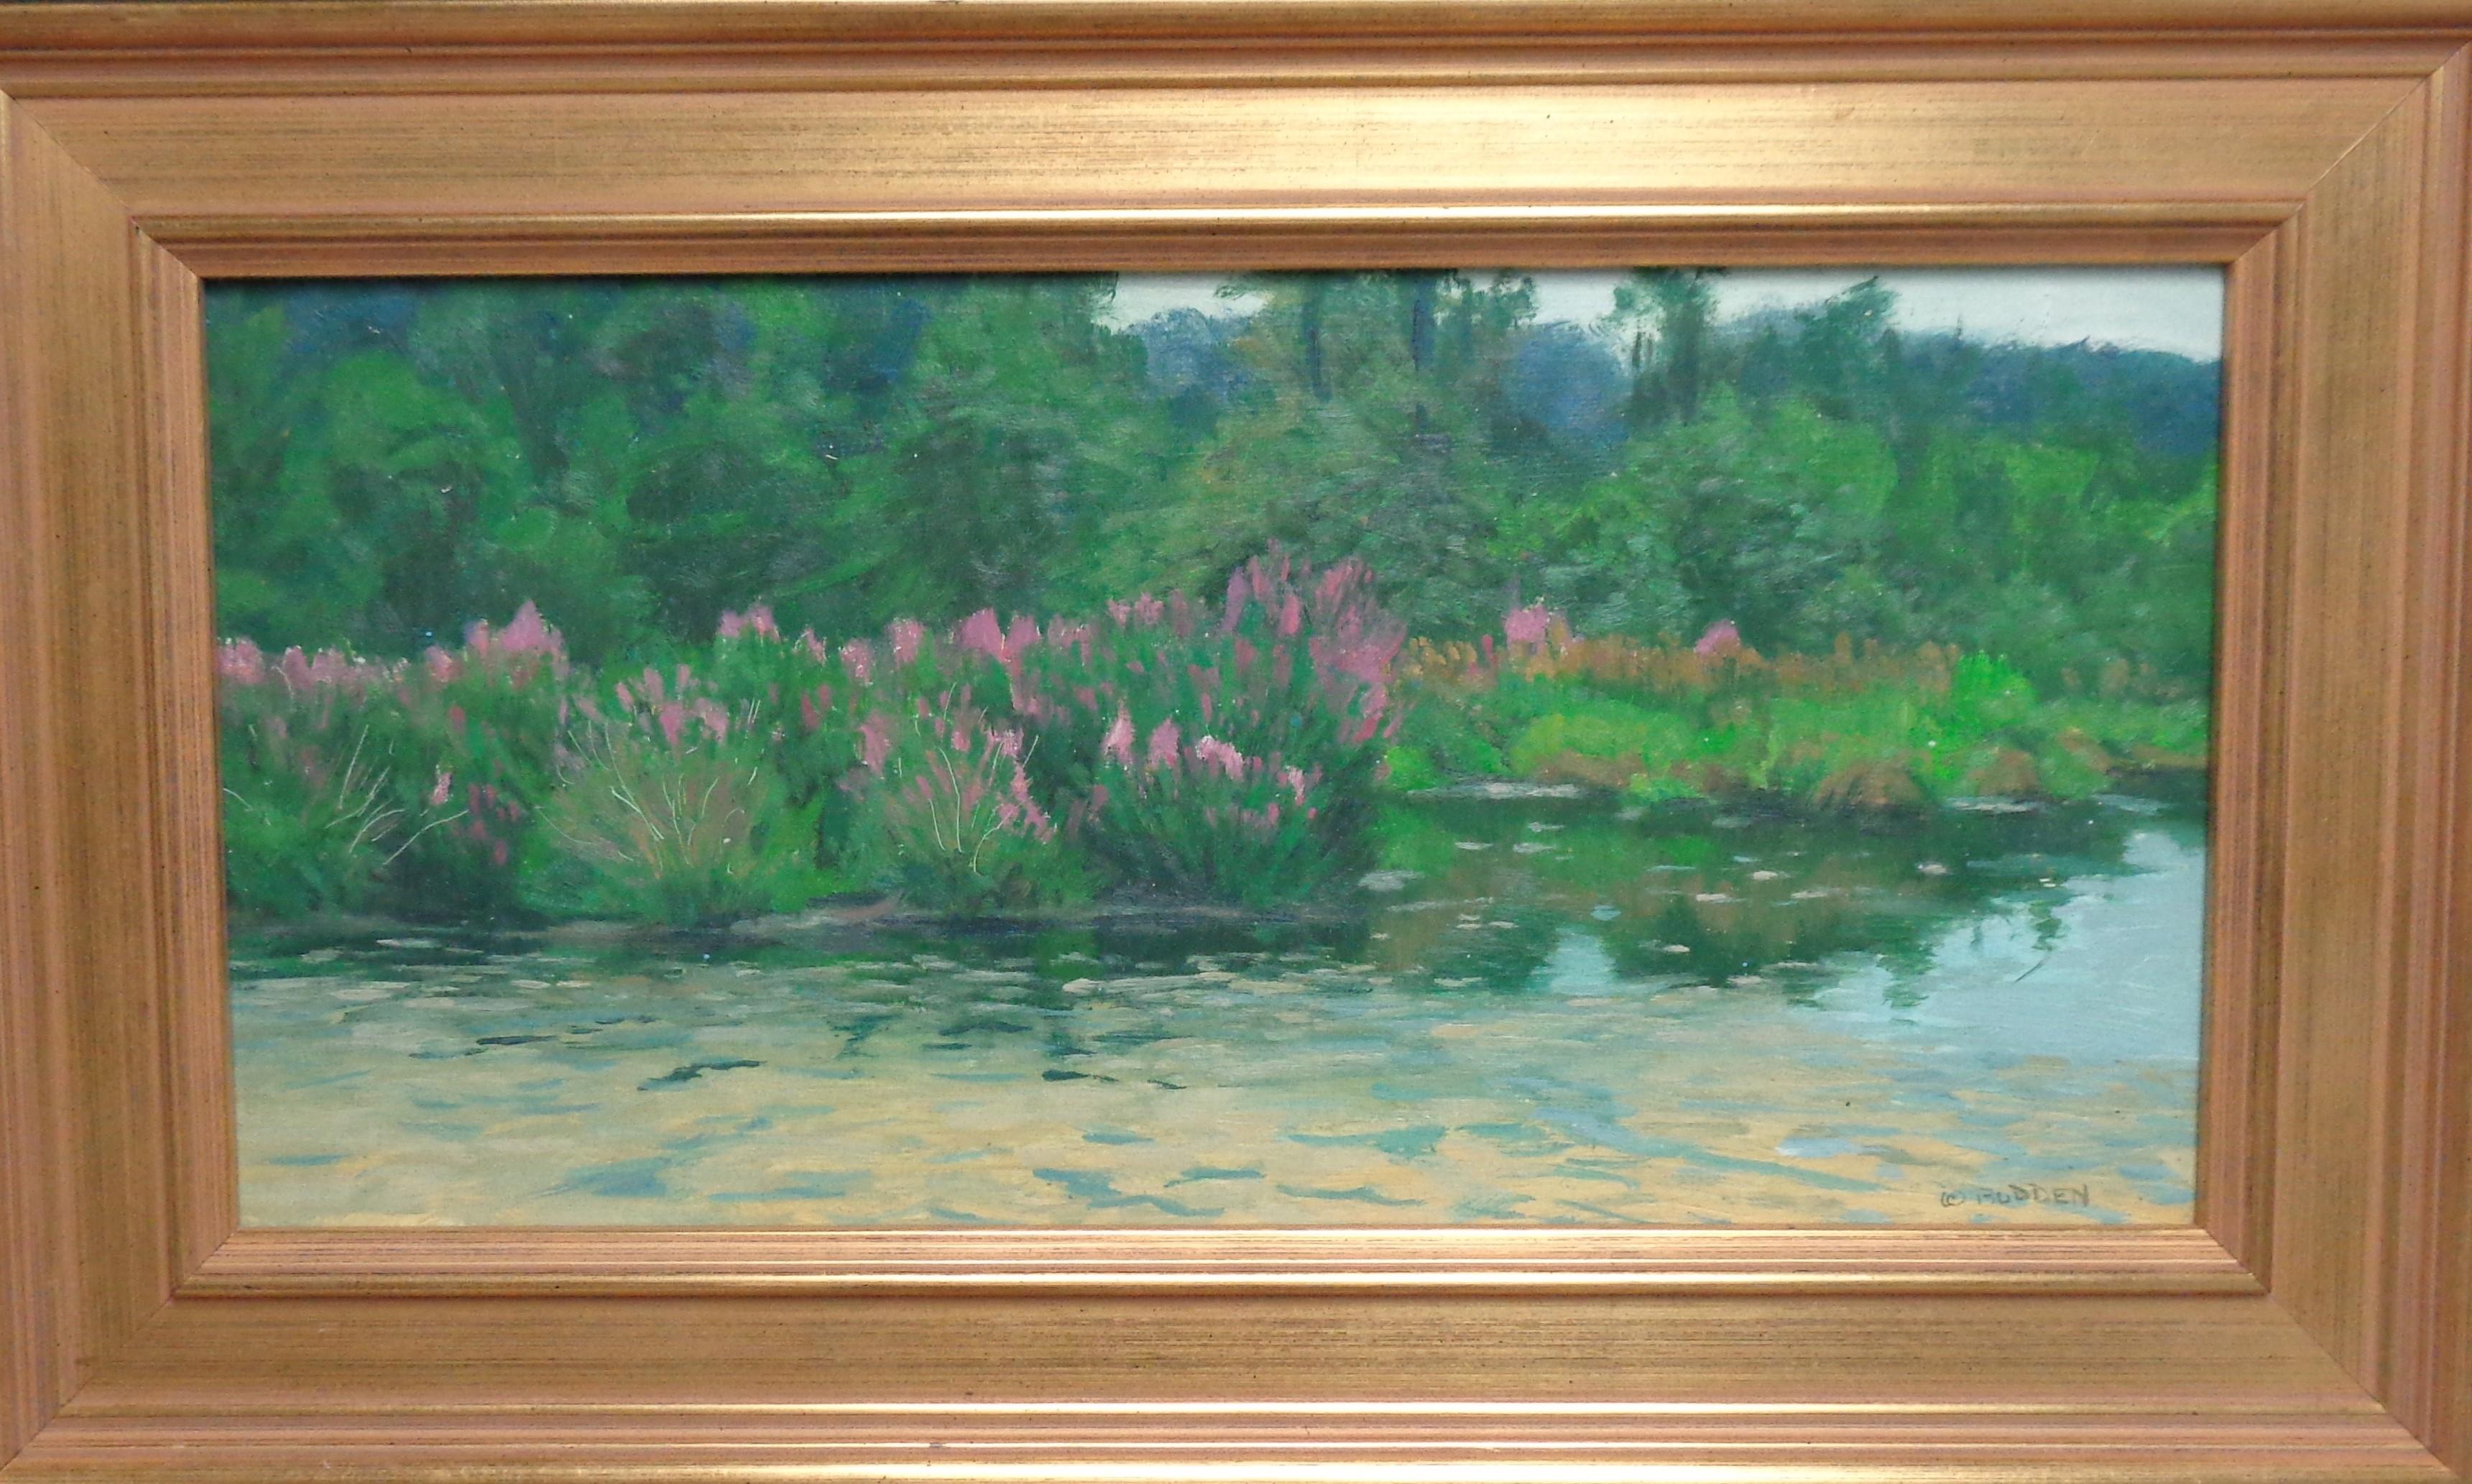 Pond and Purple Loosestrife
8 x 15.75 unframed
An oil painting on canvas panel that showcases the beautiful light among flowering purple loosestrife on a local farm pond. 

ARTIST'S STATEMENT
I have been in the art business as an artist and dealer